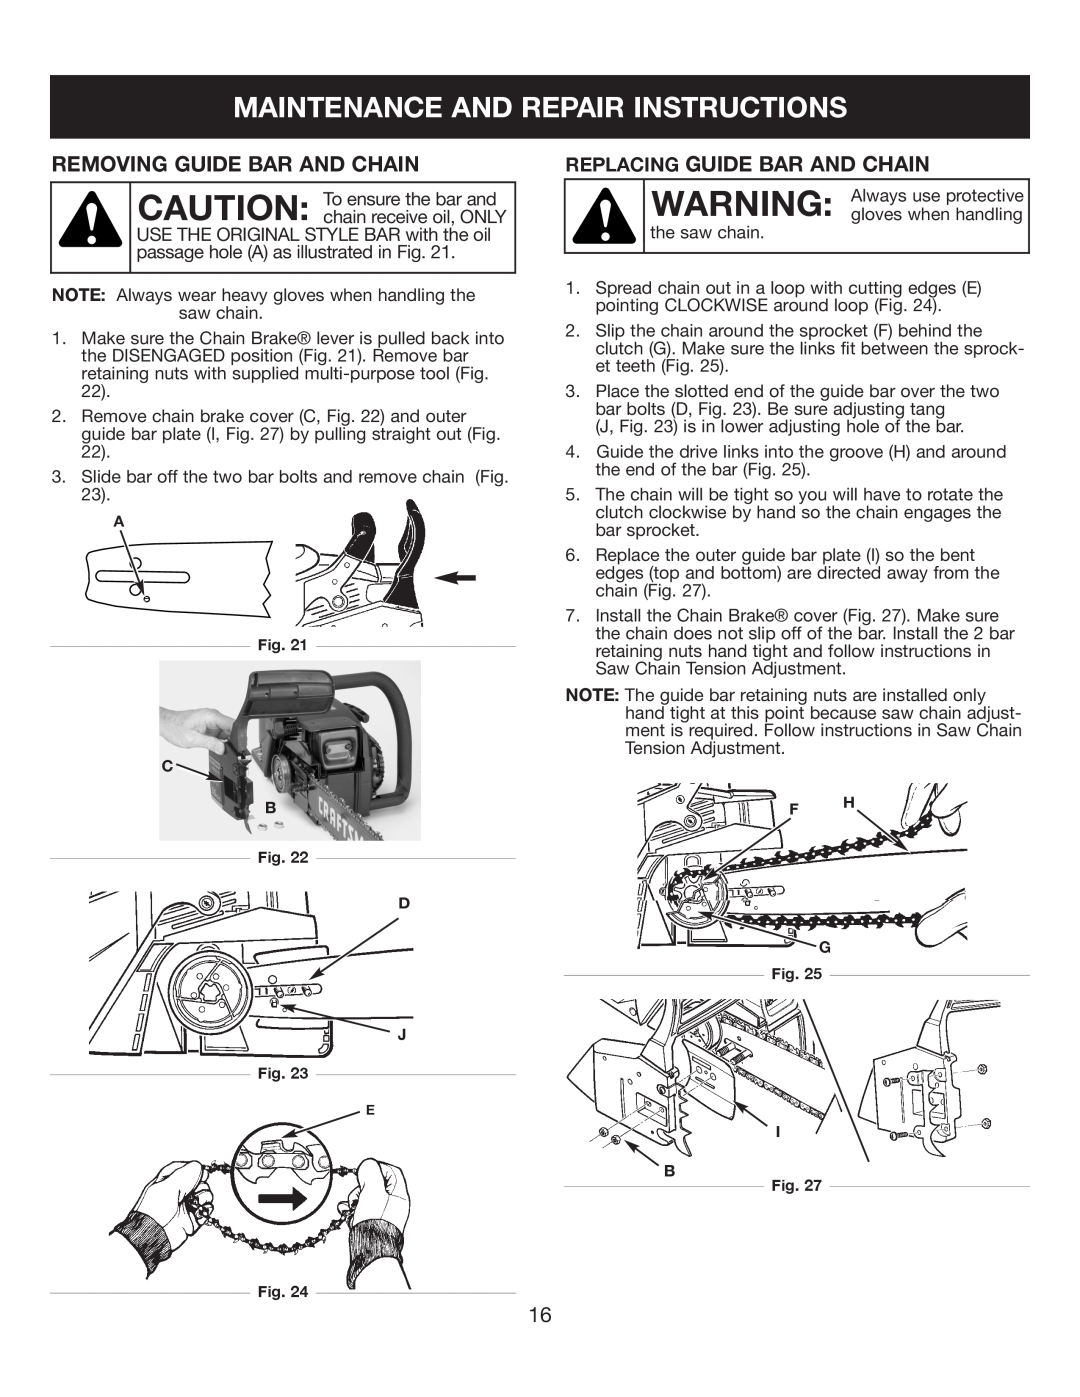 Sears 316.35084 manual Maintenance And Repair Instructions, Removing Guide Bar And Chain, Replacing Guide Bar And Chain 